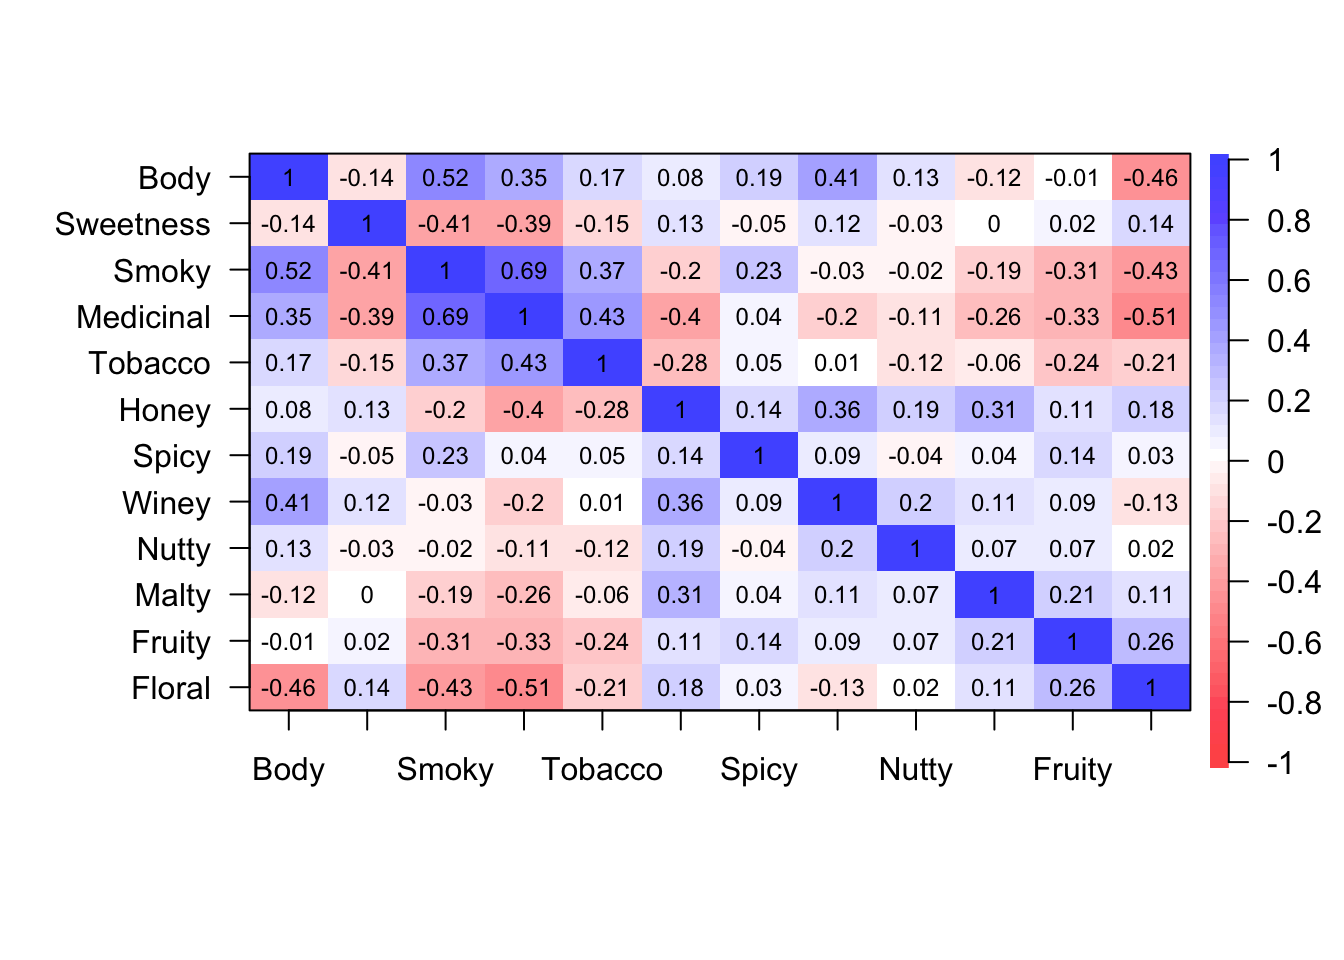 Correlation plot of each flavour characteristics from the psych package.